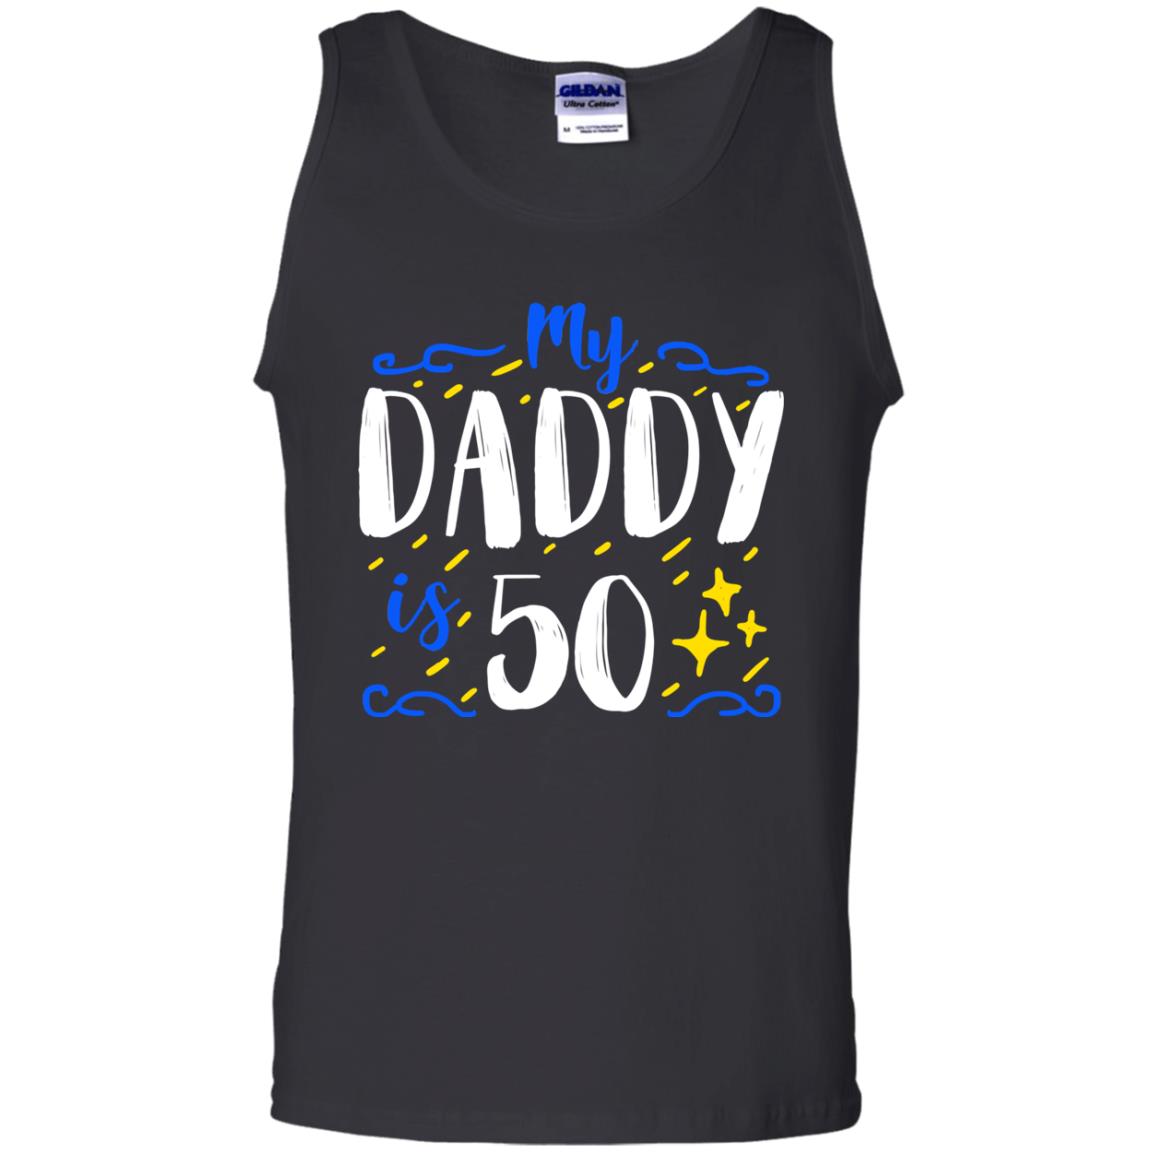 My Daddy Is 50 50th Birthday Daddy Shirt For Sons Or DaughtersG220 Gildan 100% Cotton Tank Top